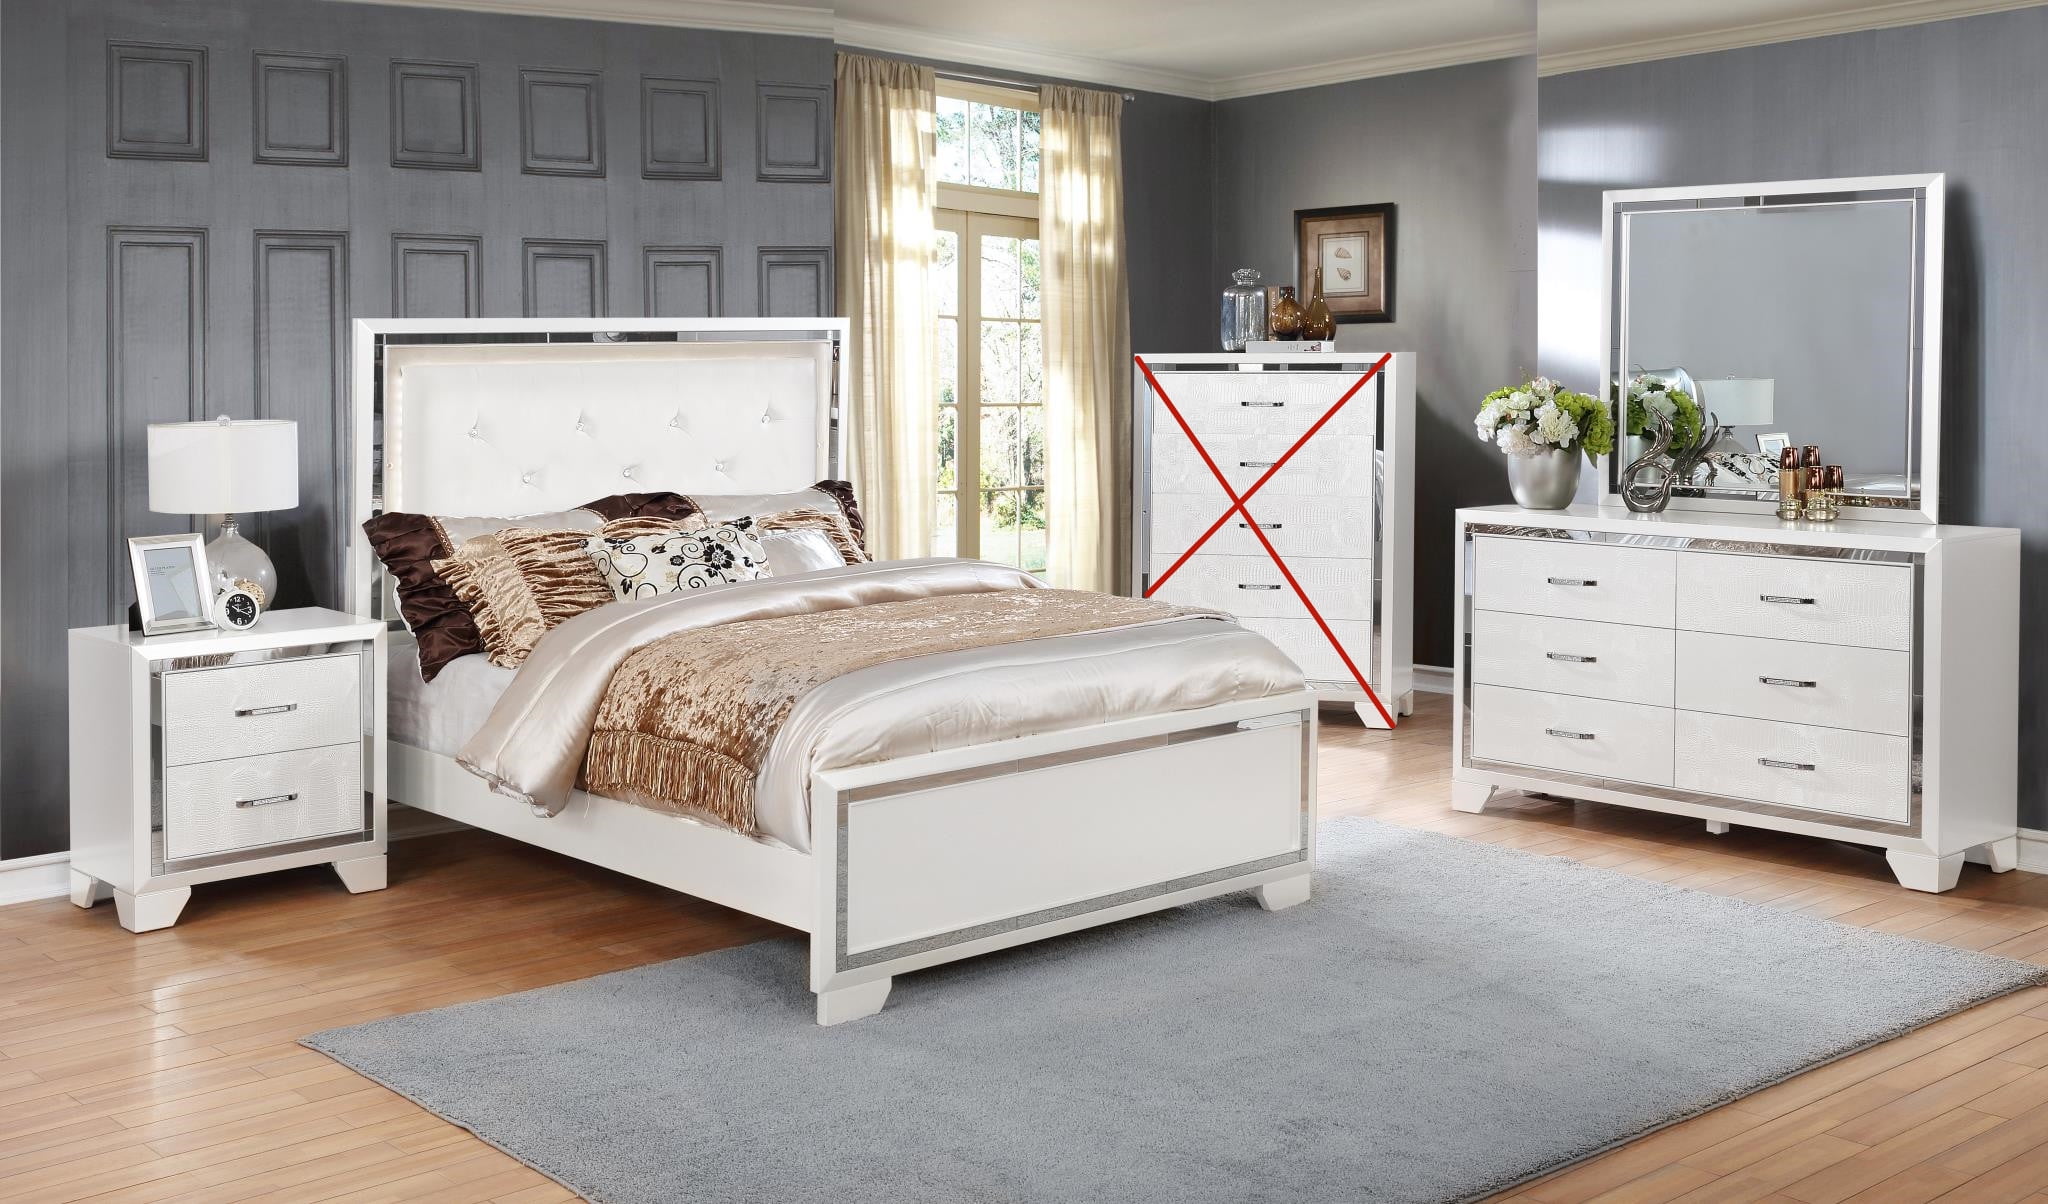 GTU Furniture Contemporary White and Silver Style Wooden King Bedroom Set (King Size Bed, 4Pc